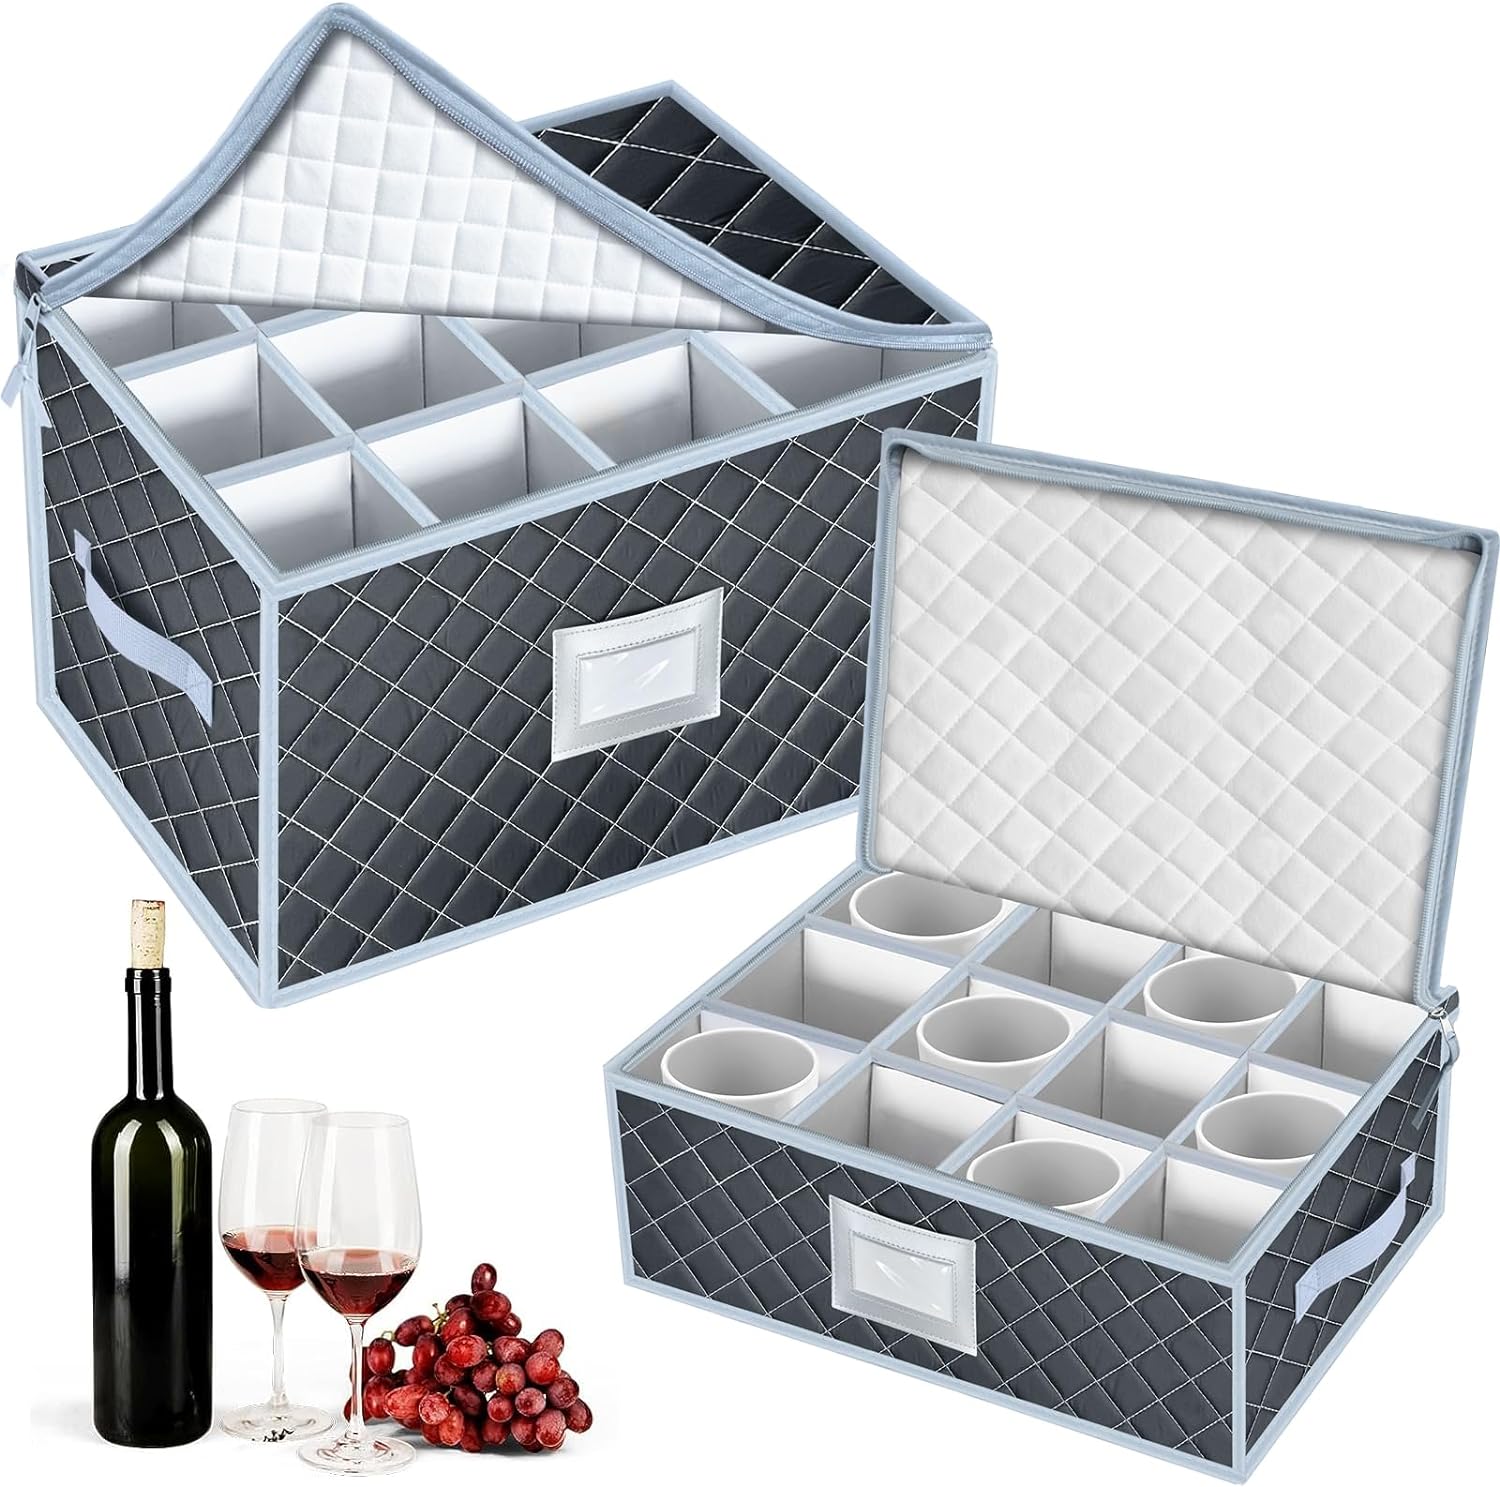 Wine Glass and Mug Storage Box with Dividers - 2 Pack China Storage Containers Set Holds 24 Glassware , StemwareCoffee Mug and Tea Cup, Organizer Bin with Sturdy Metal Zipper,Label and Handles (Grey)